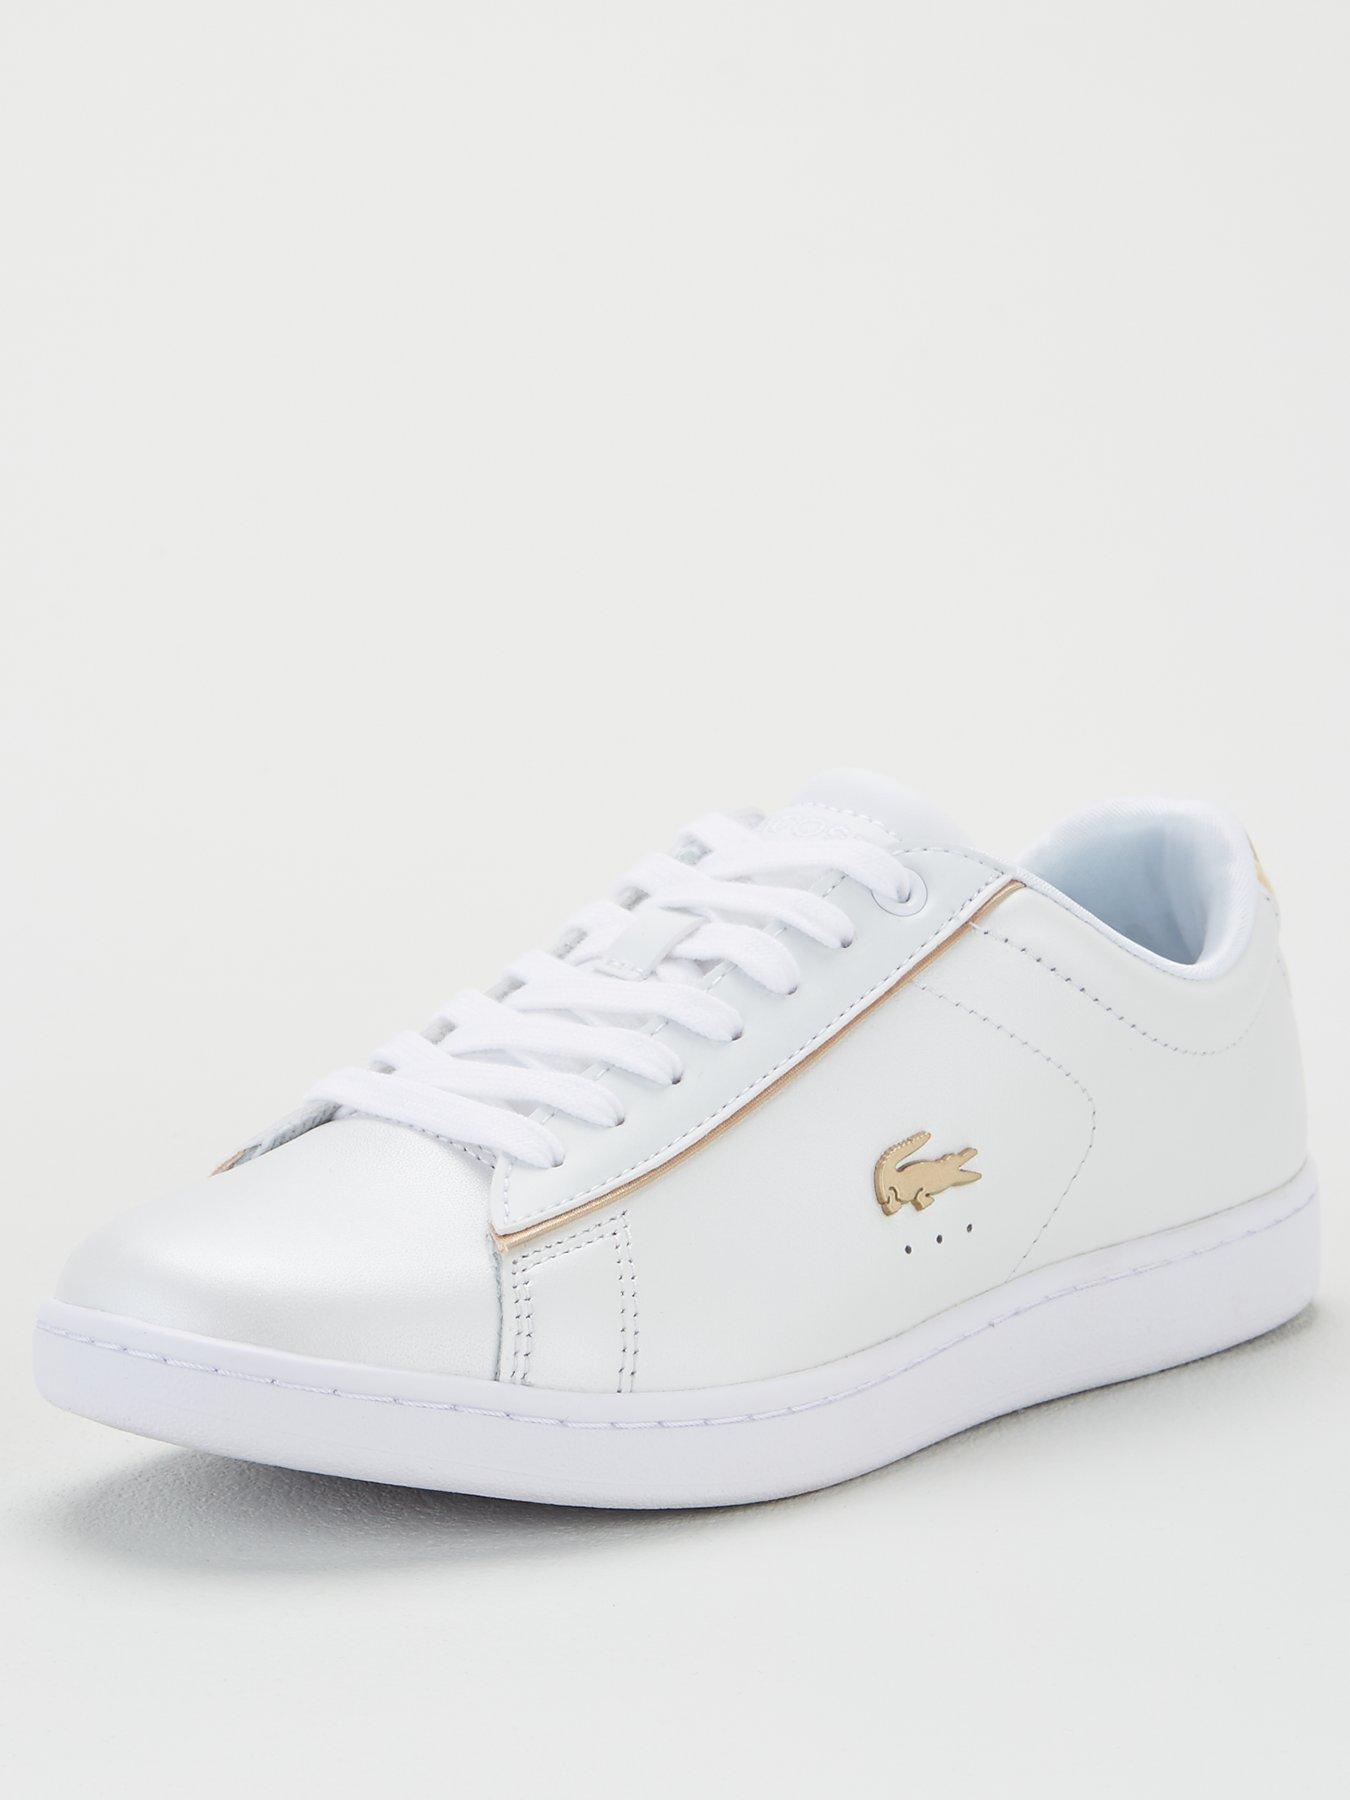 rose gold lacoste shoes